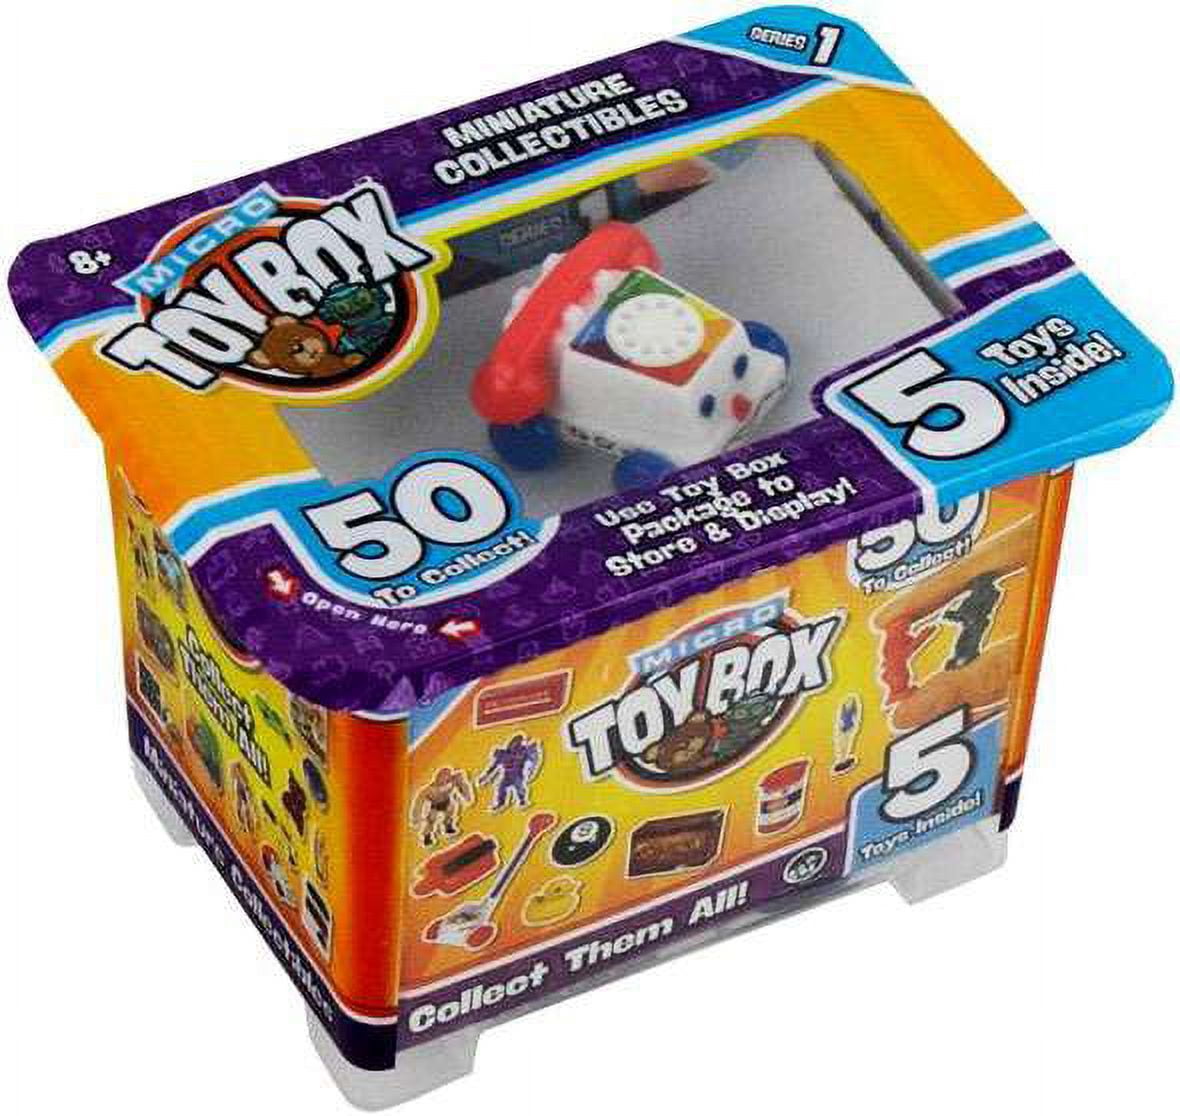 world's smallest® micro toy box™ series 1 mini collectibles blind bag, Five Below